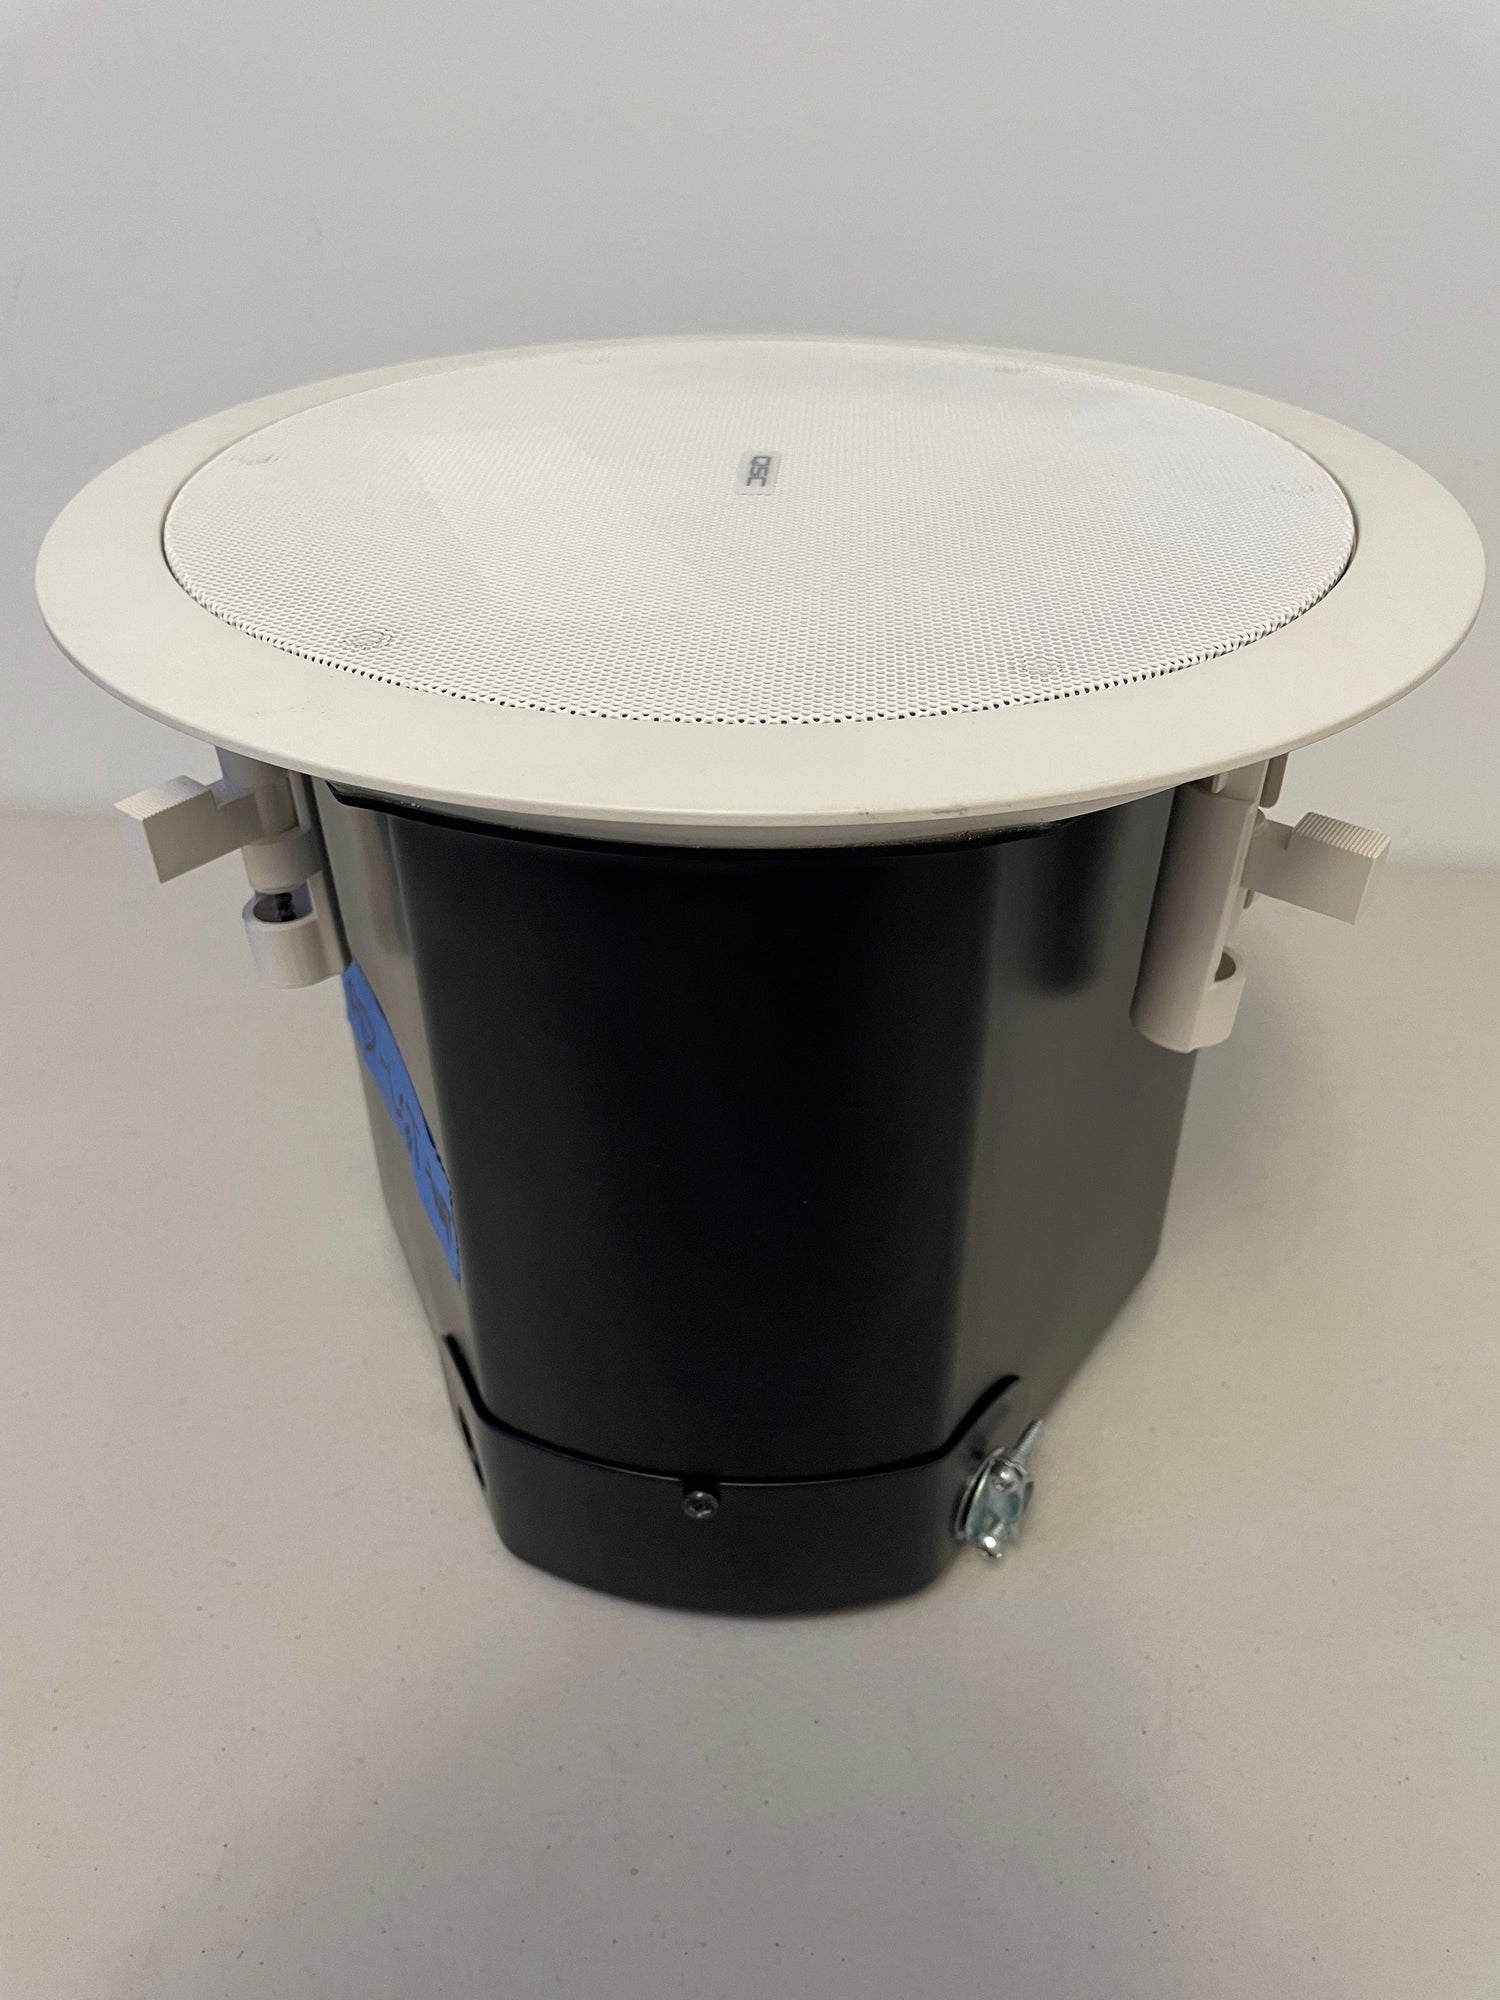 Used QSC AD-C6T Ceiling Speaker (1) White for Sale. We Sell Professional Audio Equipment. Audio Systems, Amplifiers, Consoles, Mixers, Electronics, Entertainment and Live Sound.